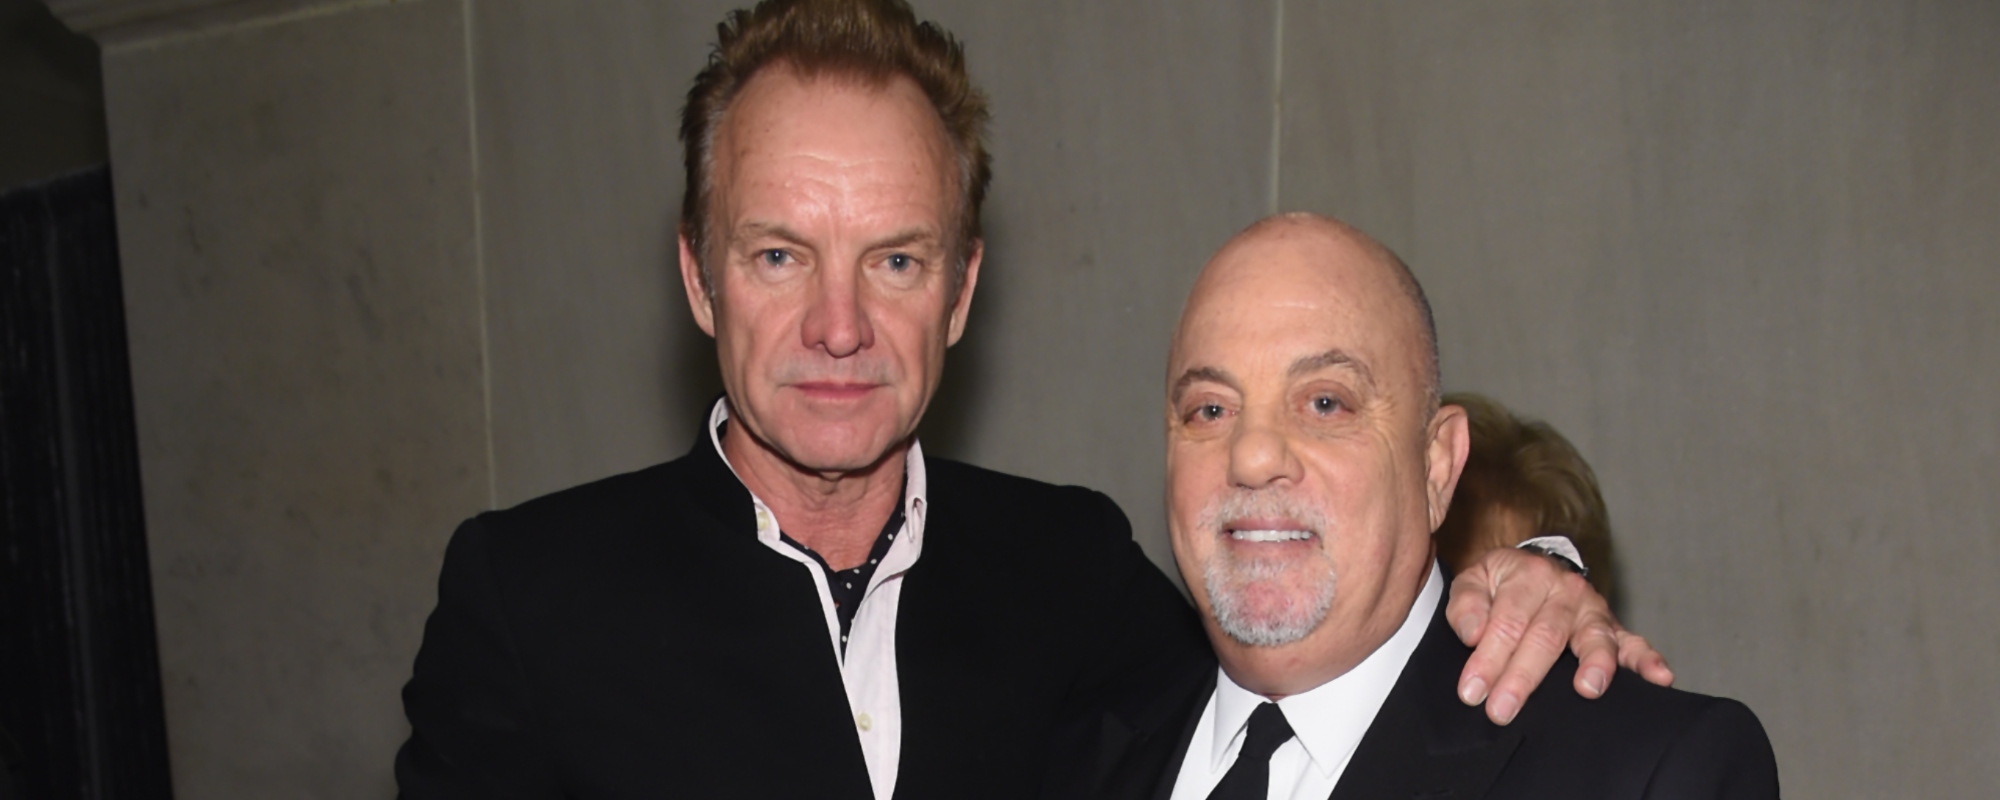 Billy Joel and Sting Perform “Every Little Thing She Does is Magic” and “Big Man On Mulberry Street” Together Live